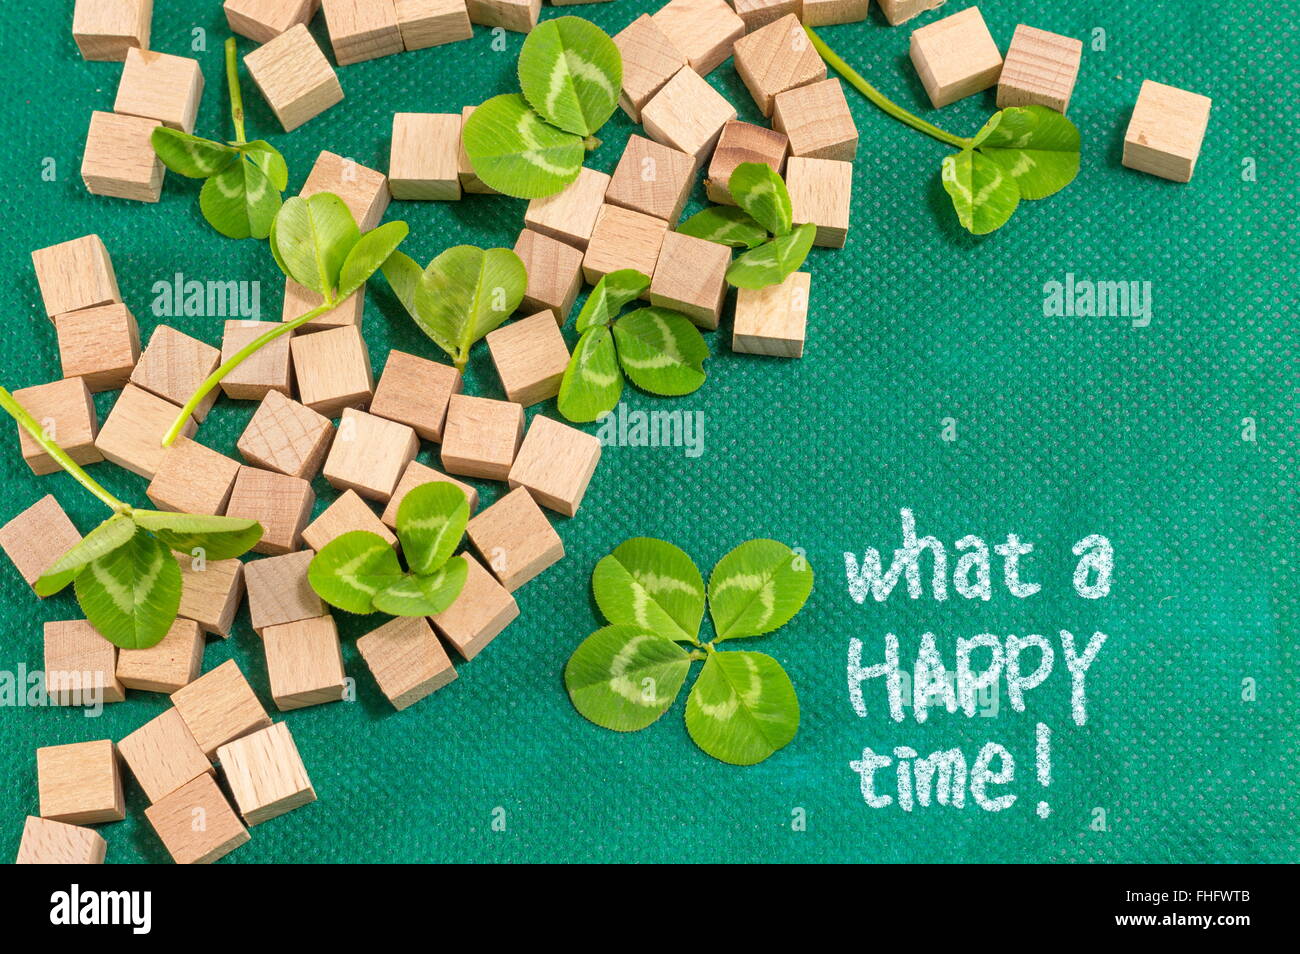 St. Patrick decoration with clover and small wooden cubes Stock Photo